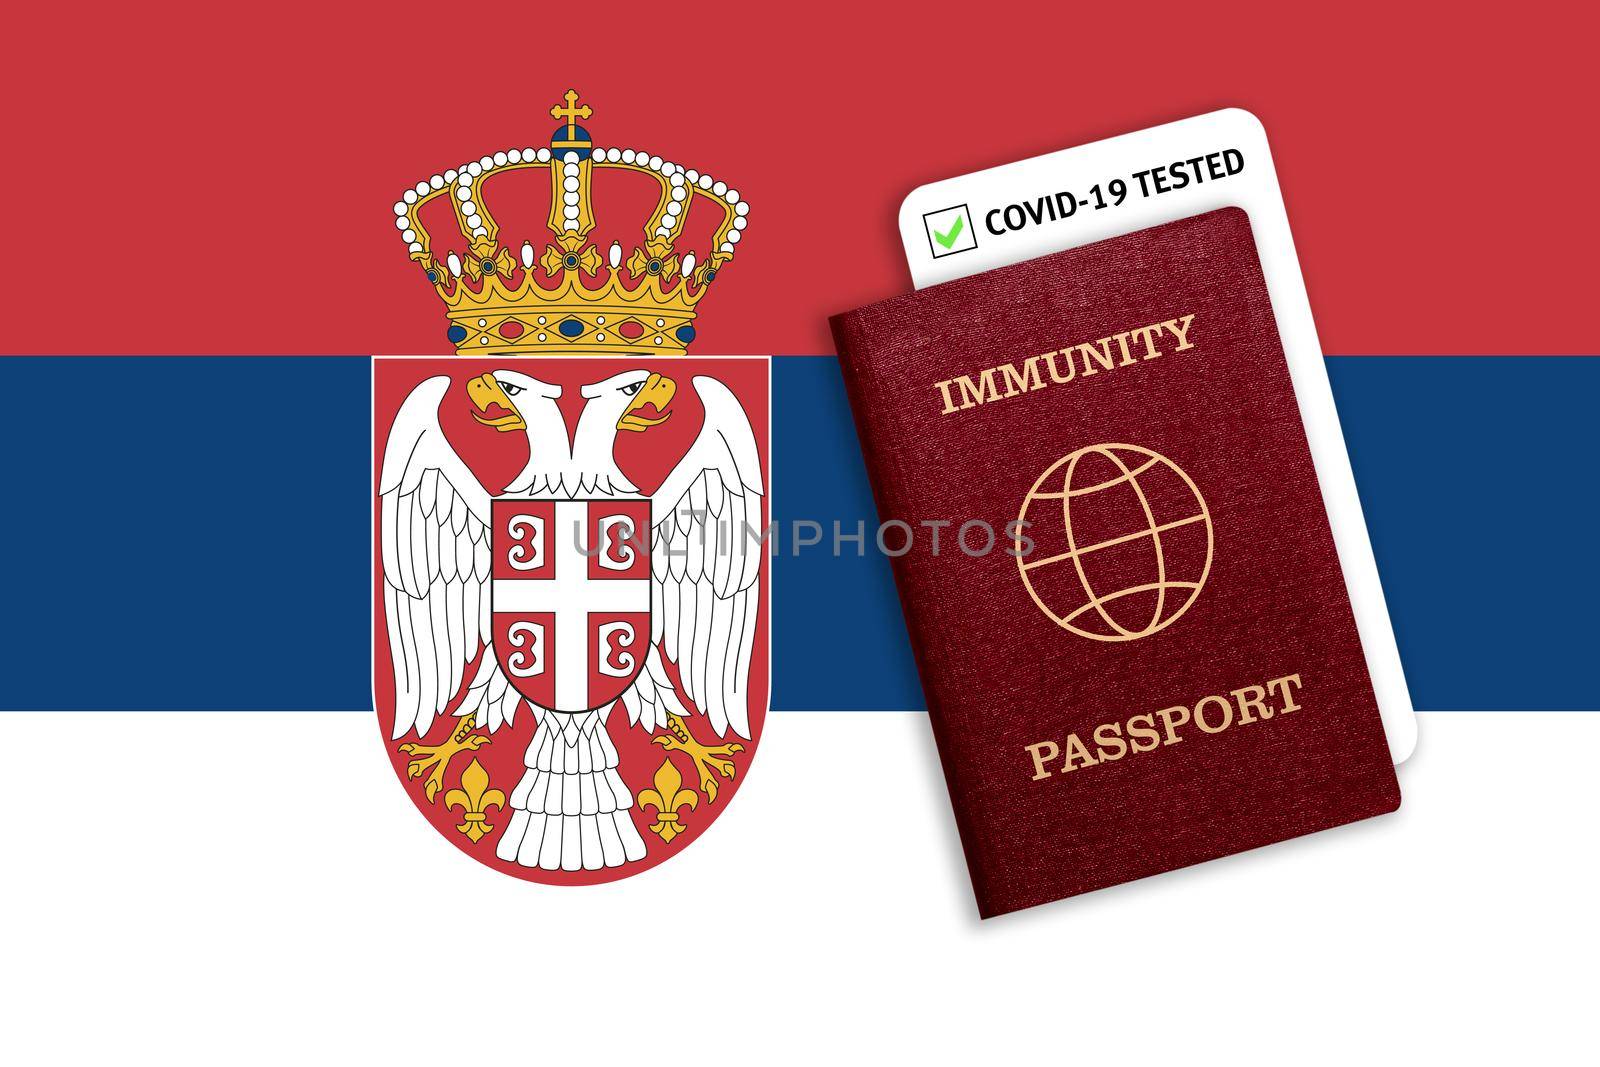 Concept of Immunity passport, certificate for traveling after pandemic for people who have had coronavirus or made vaccine and test result for COVID-19 on flag of Serbia